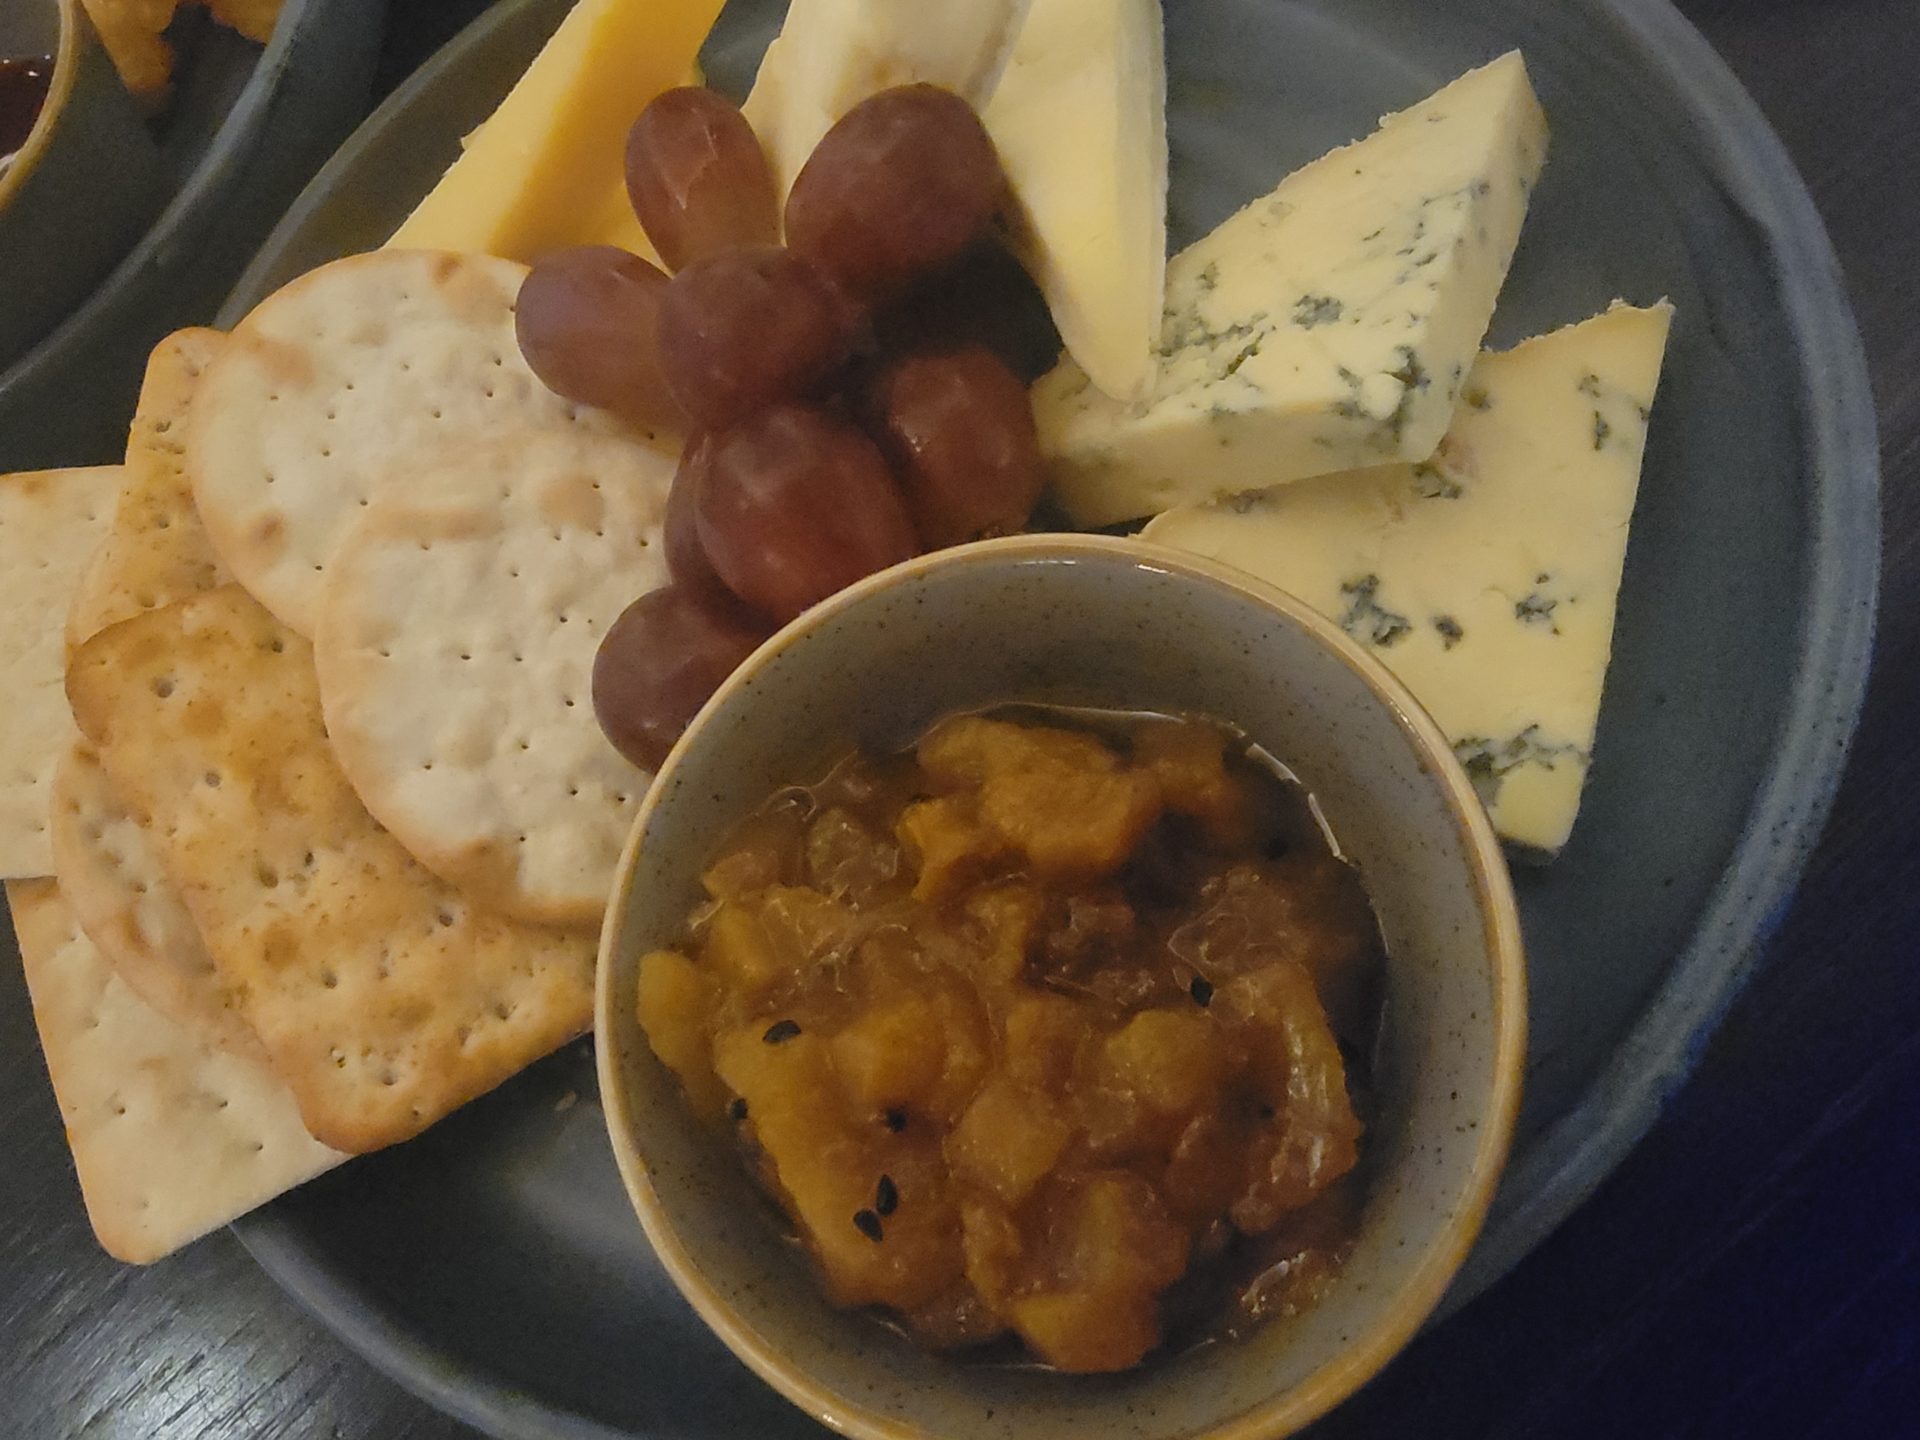 a plate of cheese and crackers with grapes and jam